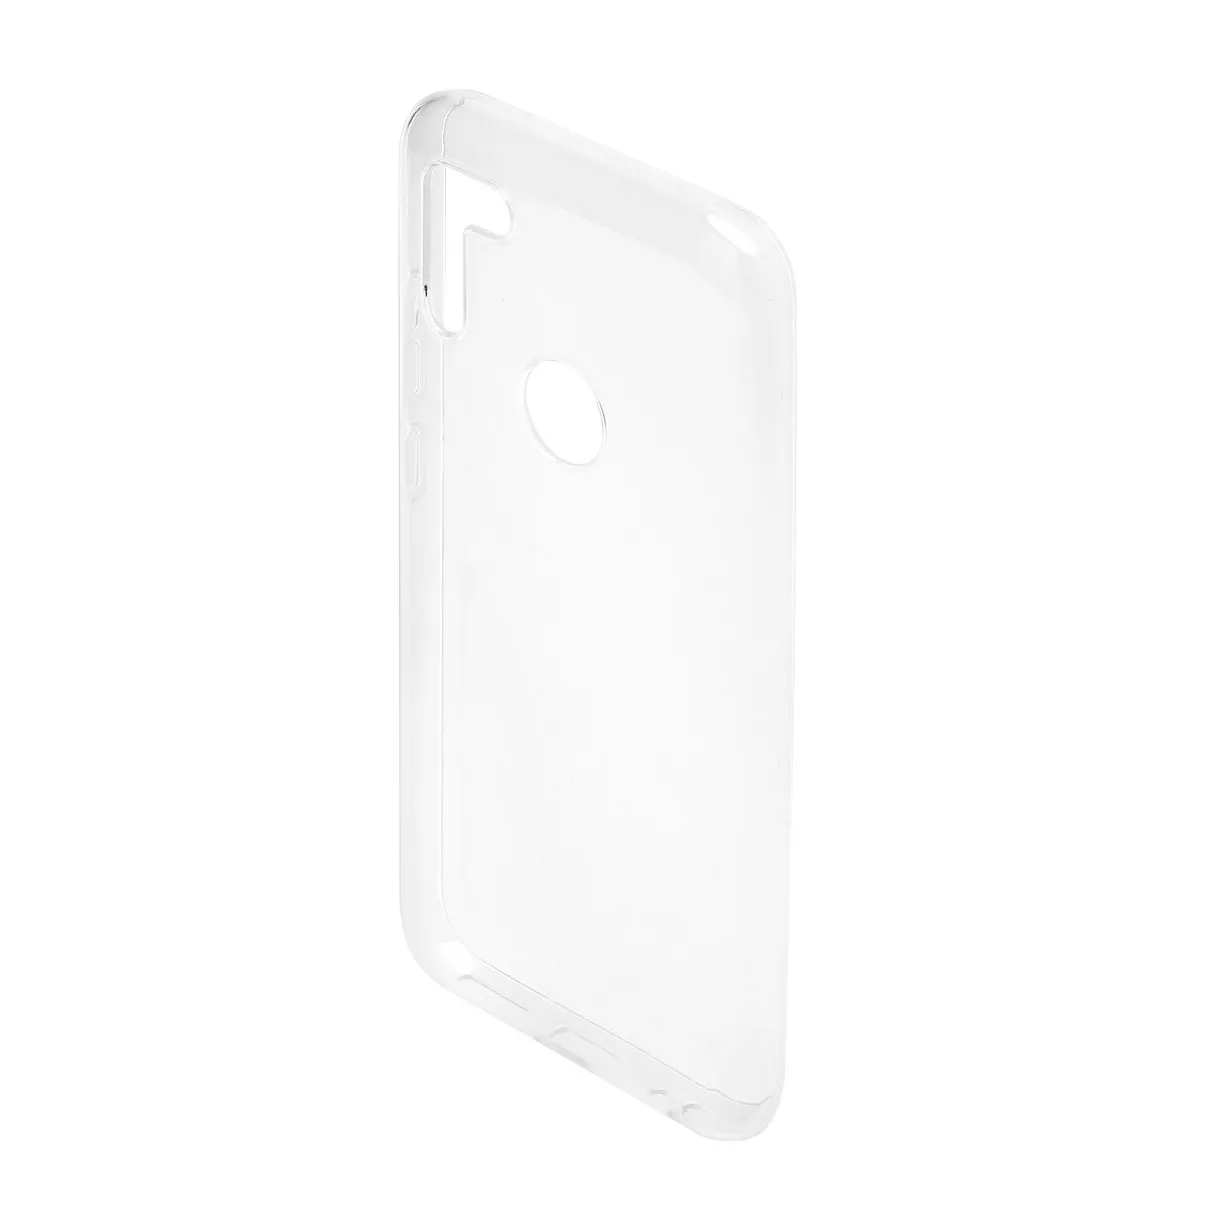 Gigaset GS5 Protection Case